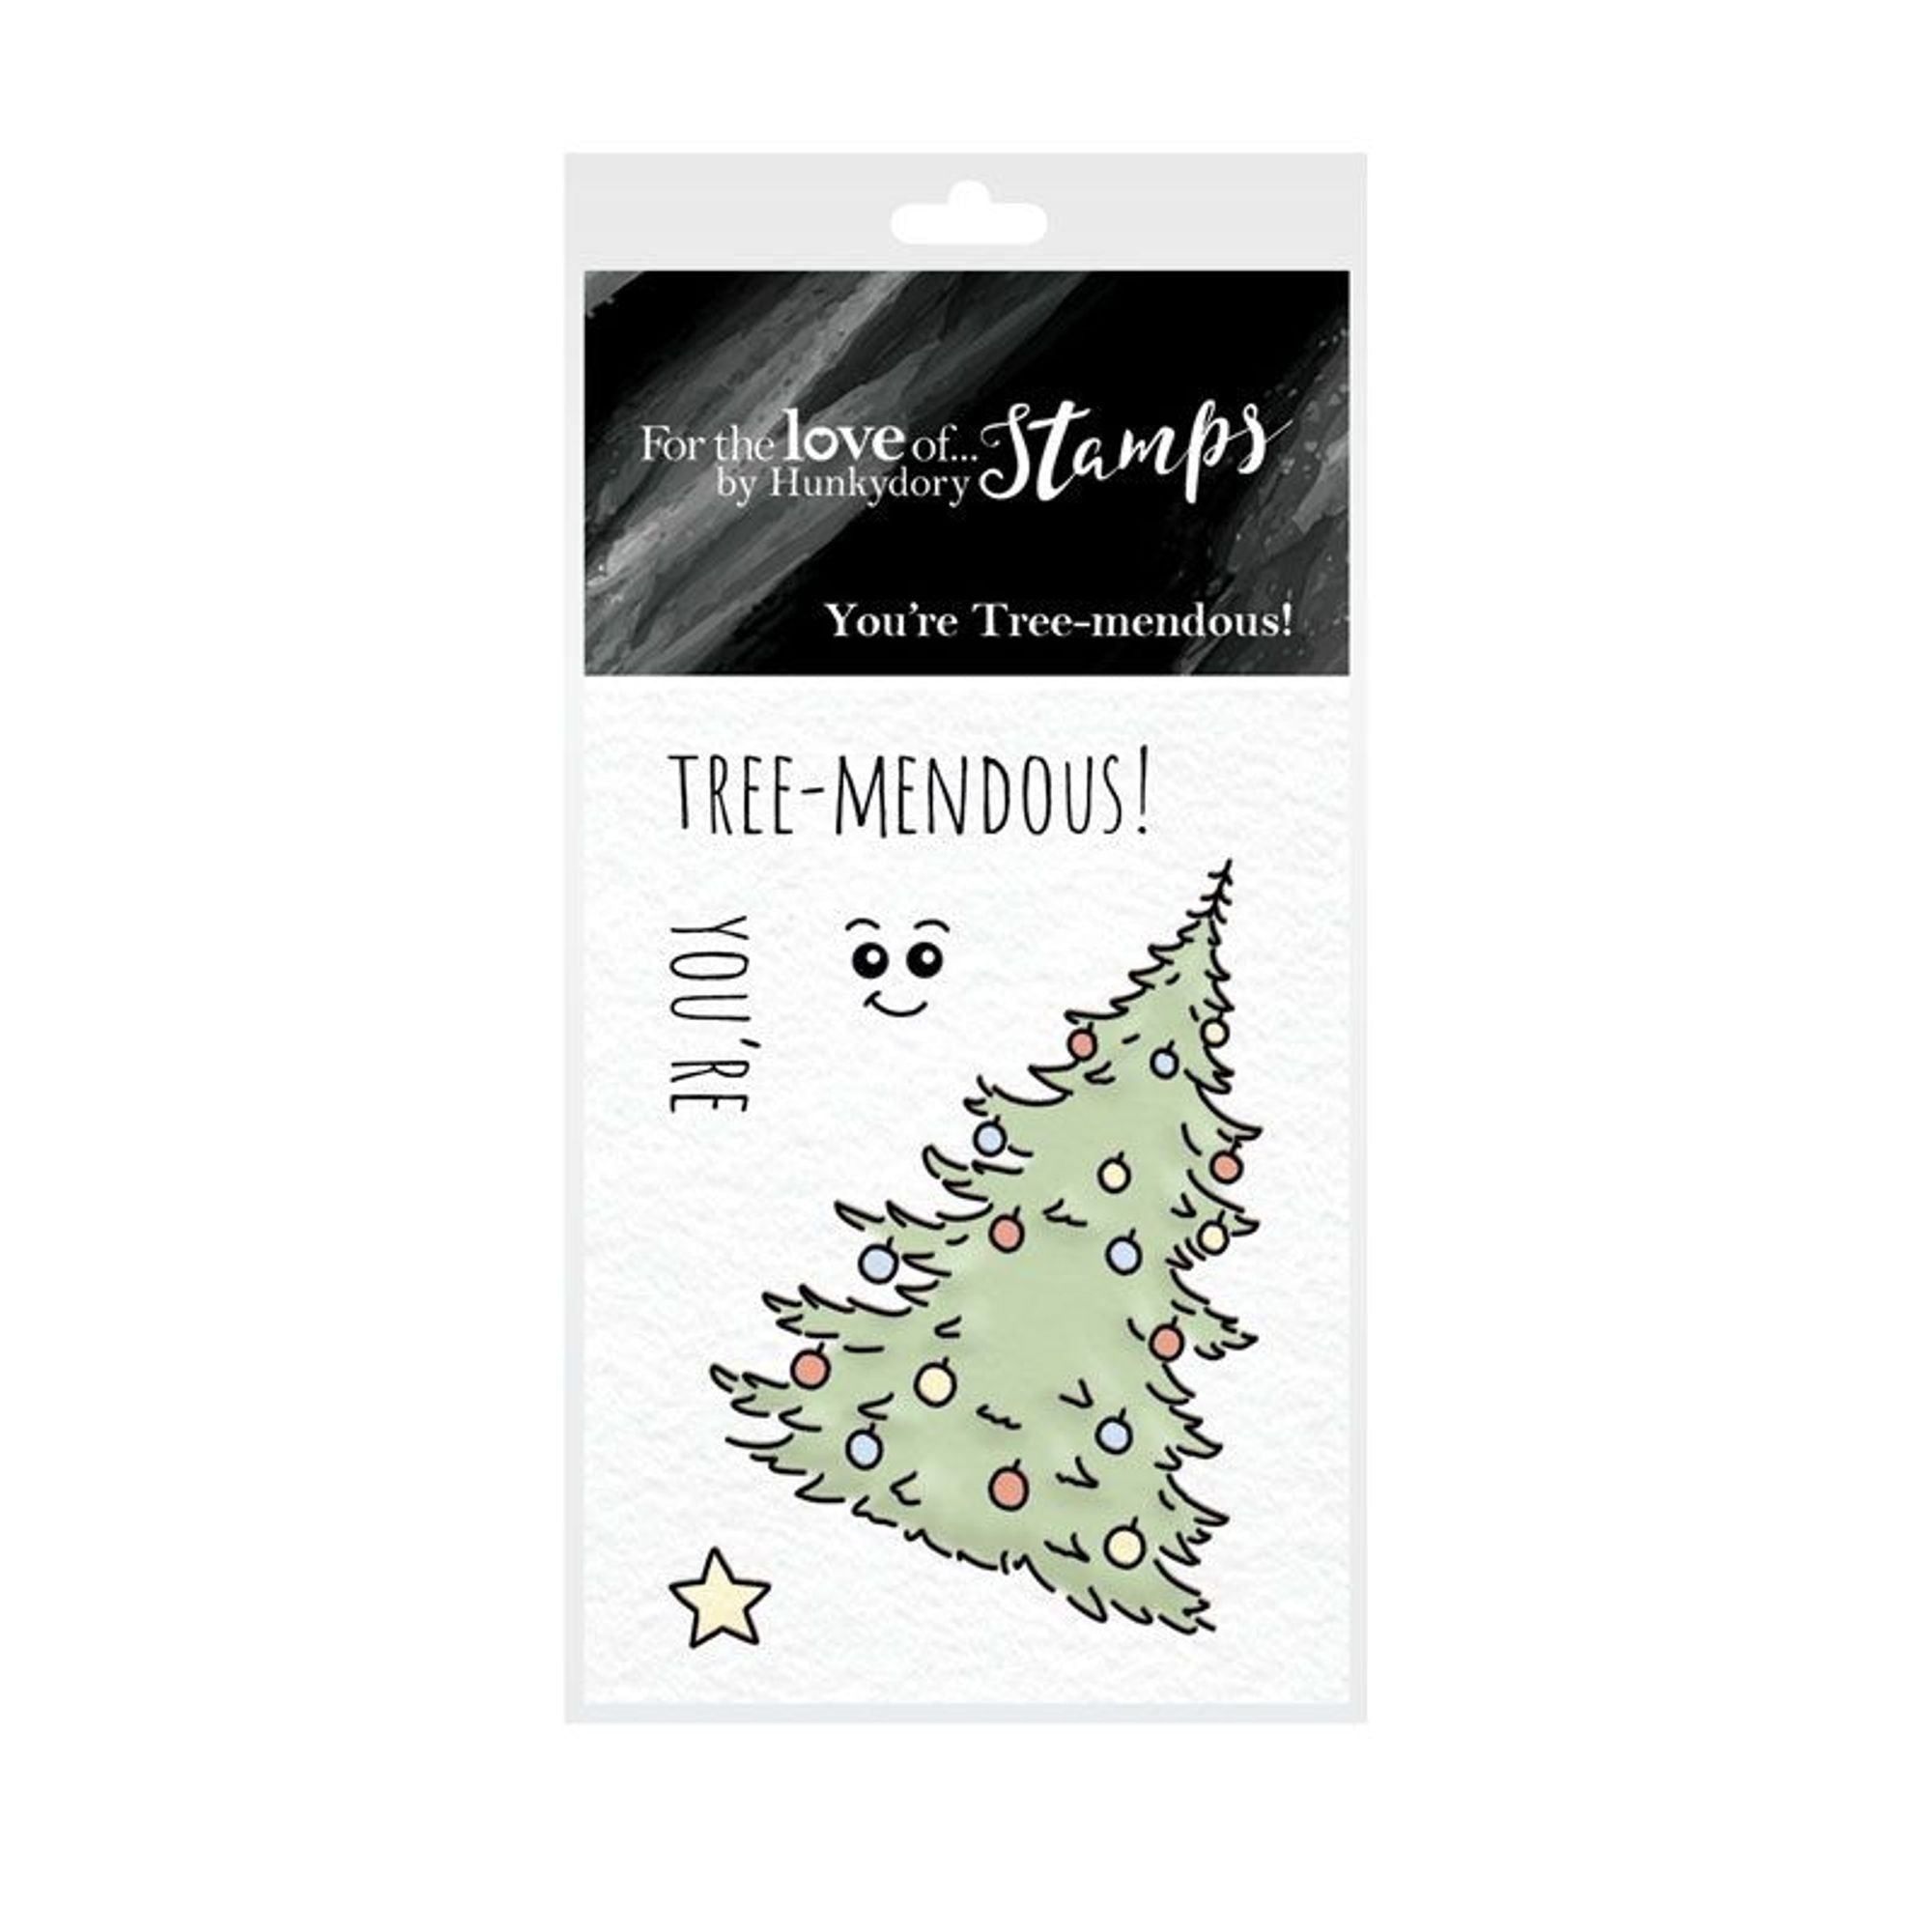 For the Love of Stamps - You're Tree-Mendous